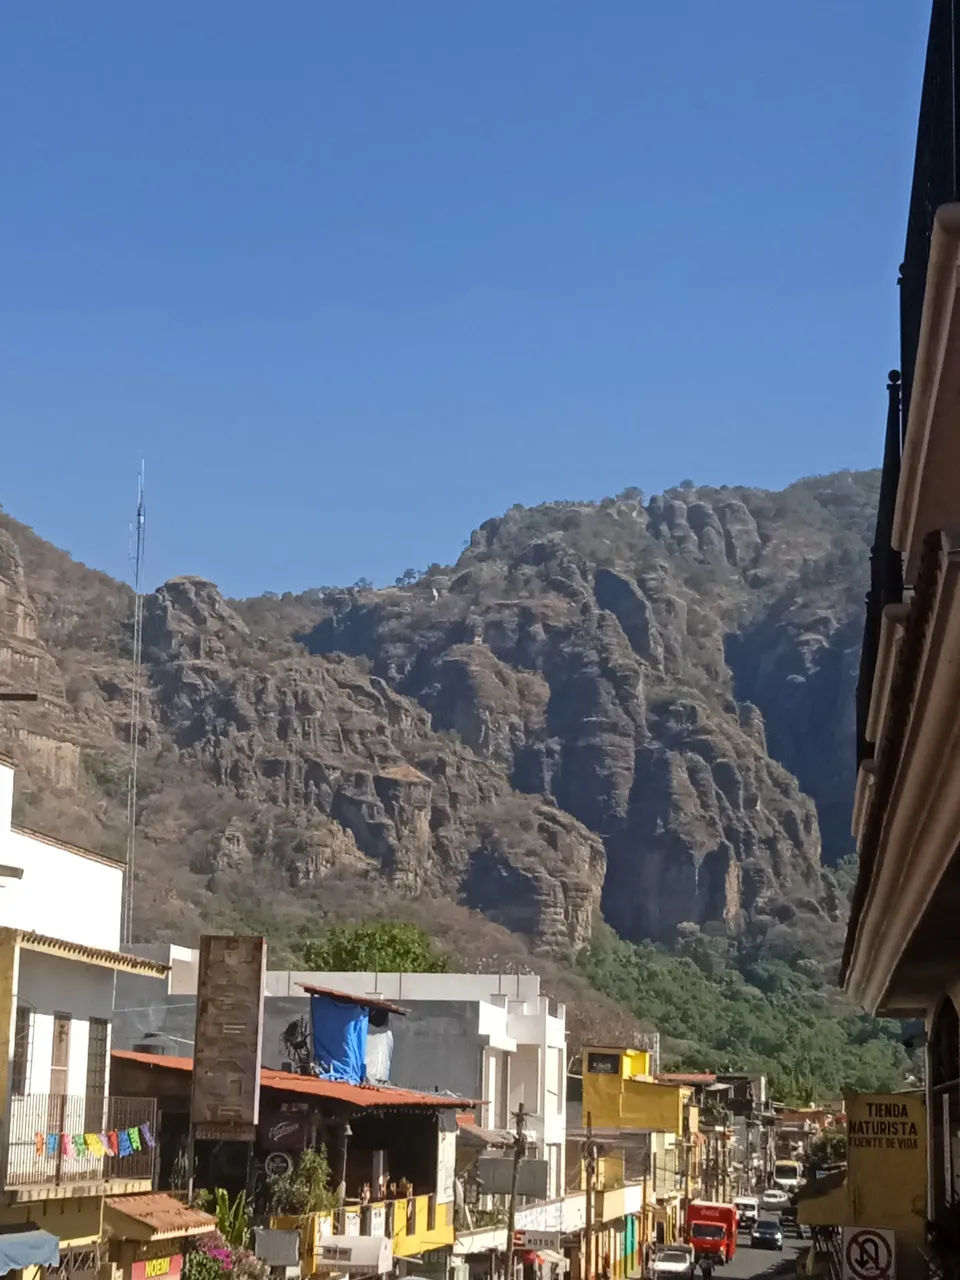 View of the hills where the Temple is located, from the main street of the town.